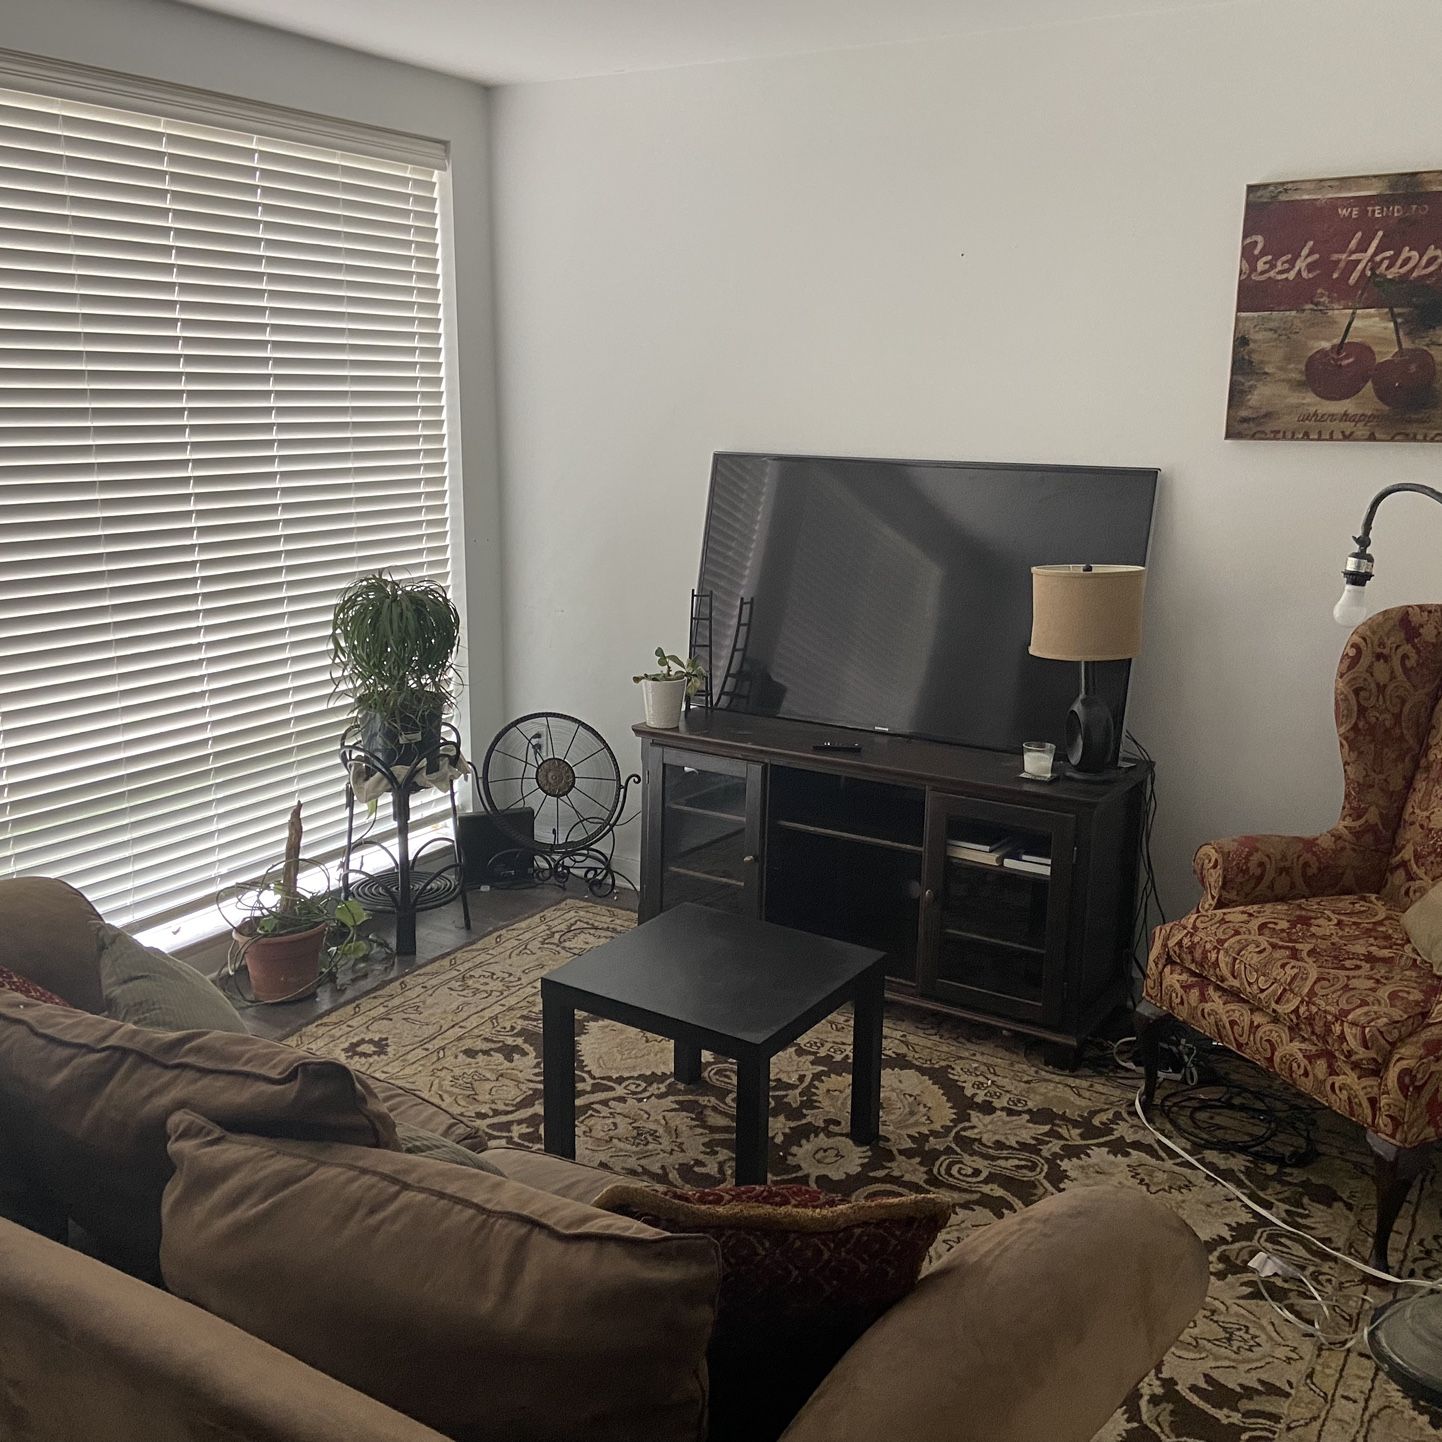 Full Living Room Set (everything seen in picture) 